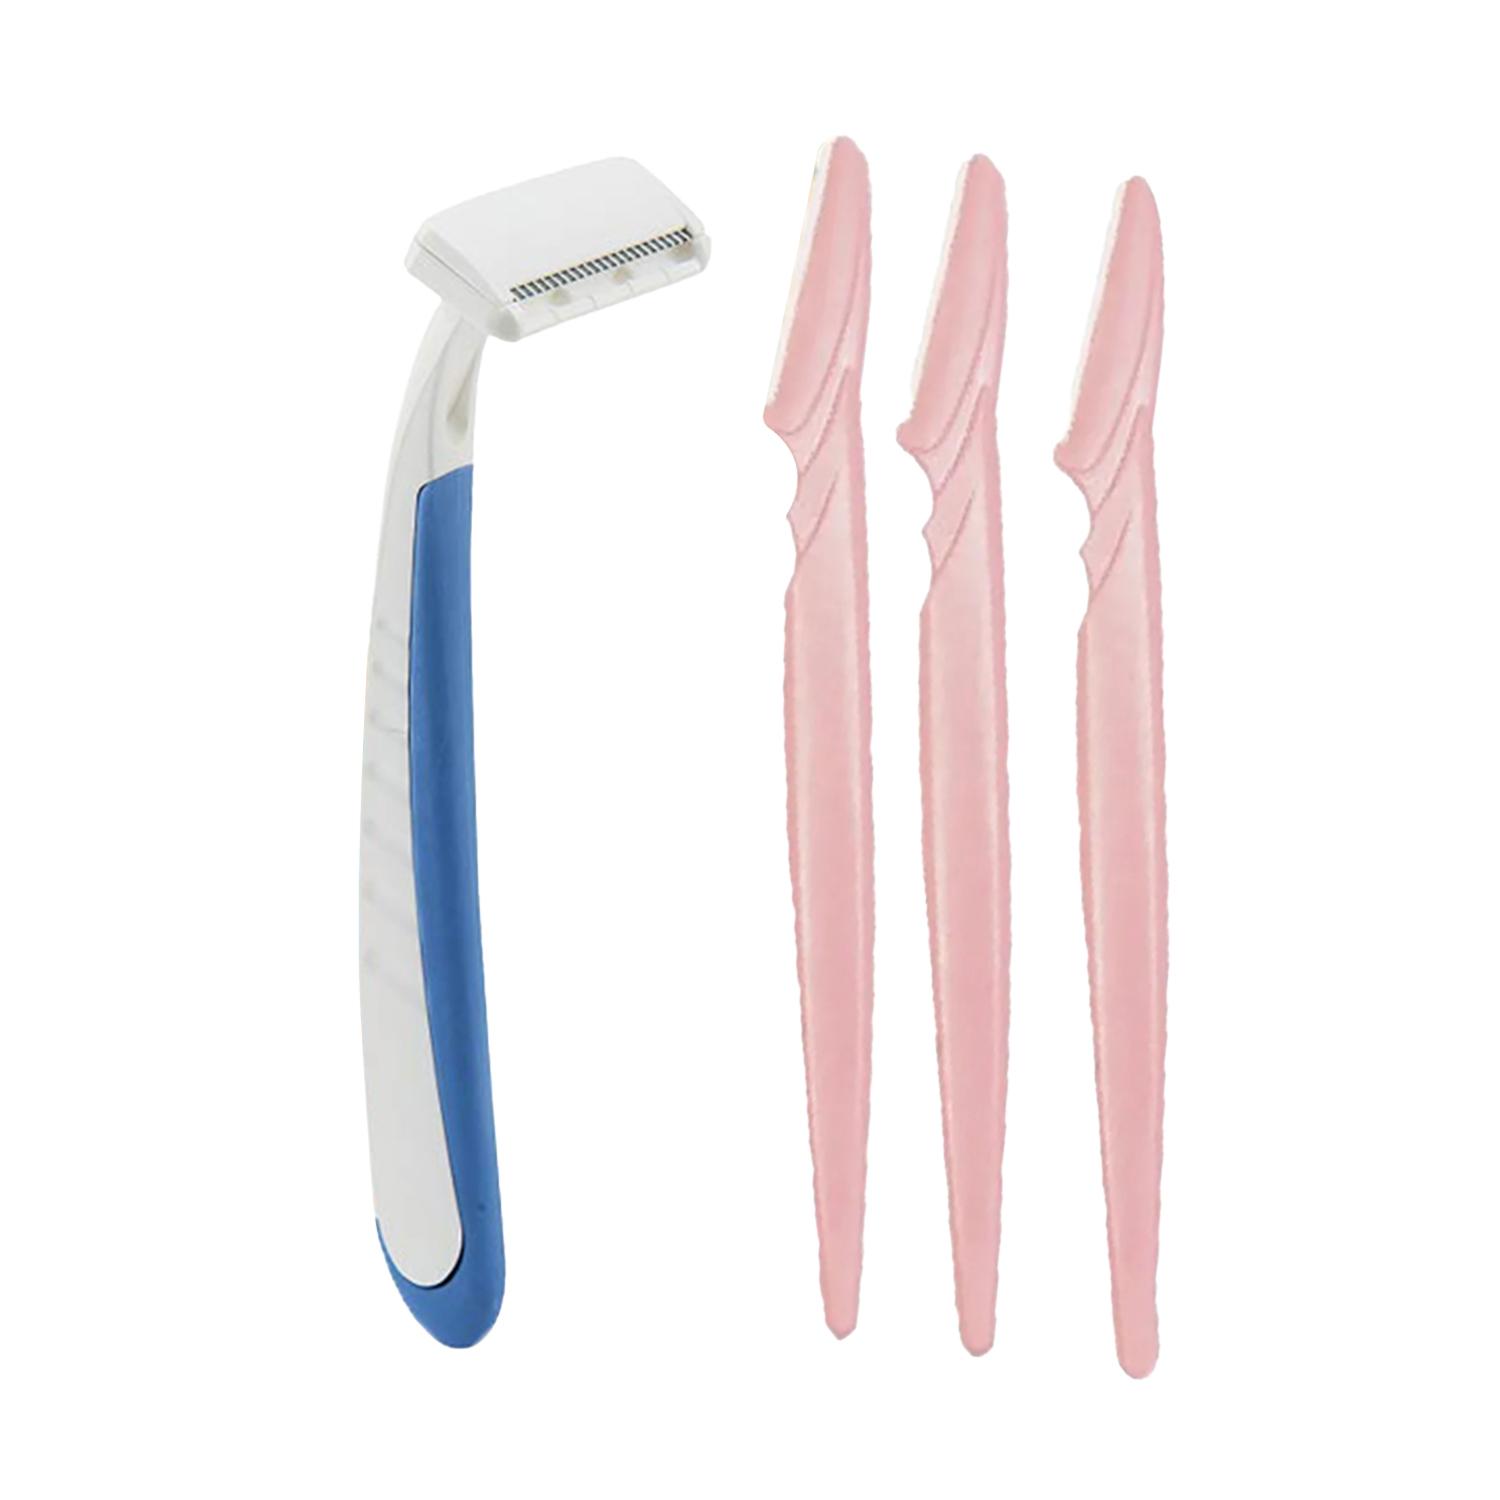 Sanfe | Sanfe Bikiniline Trimmer & Razor For Sensitive Areas and Eyebrow Touch up Razor - Pack of 3 Combo